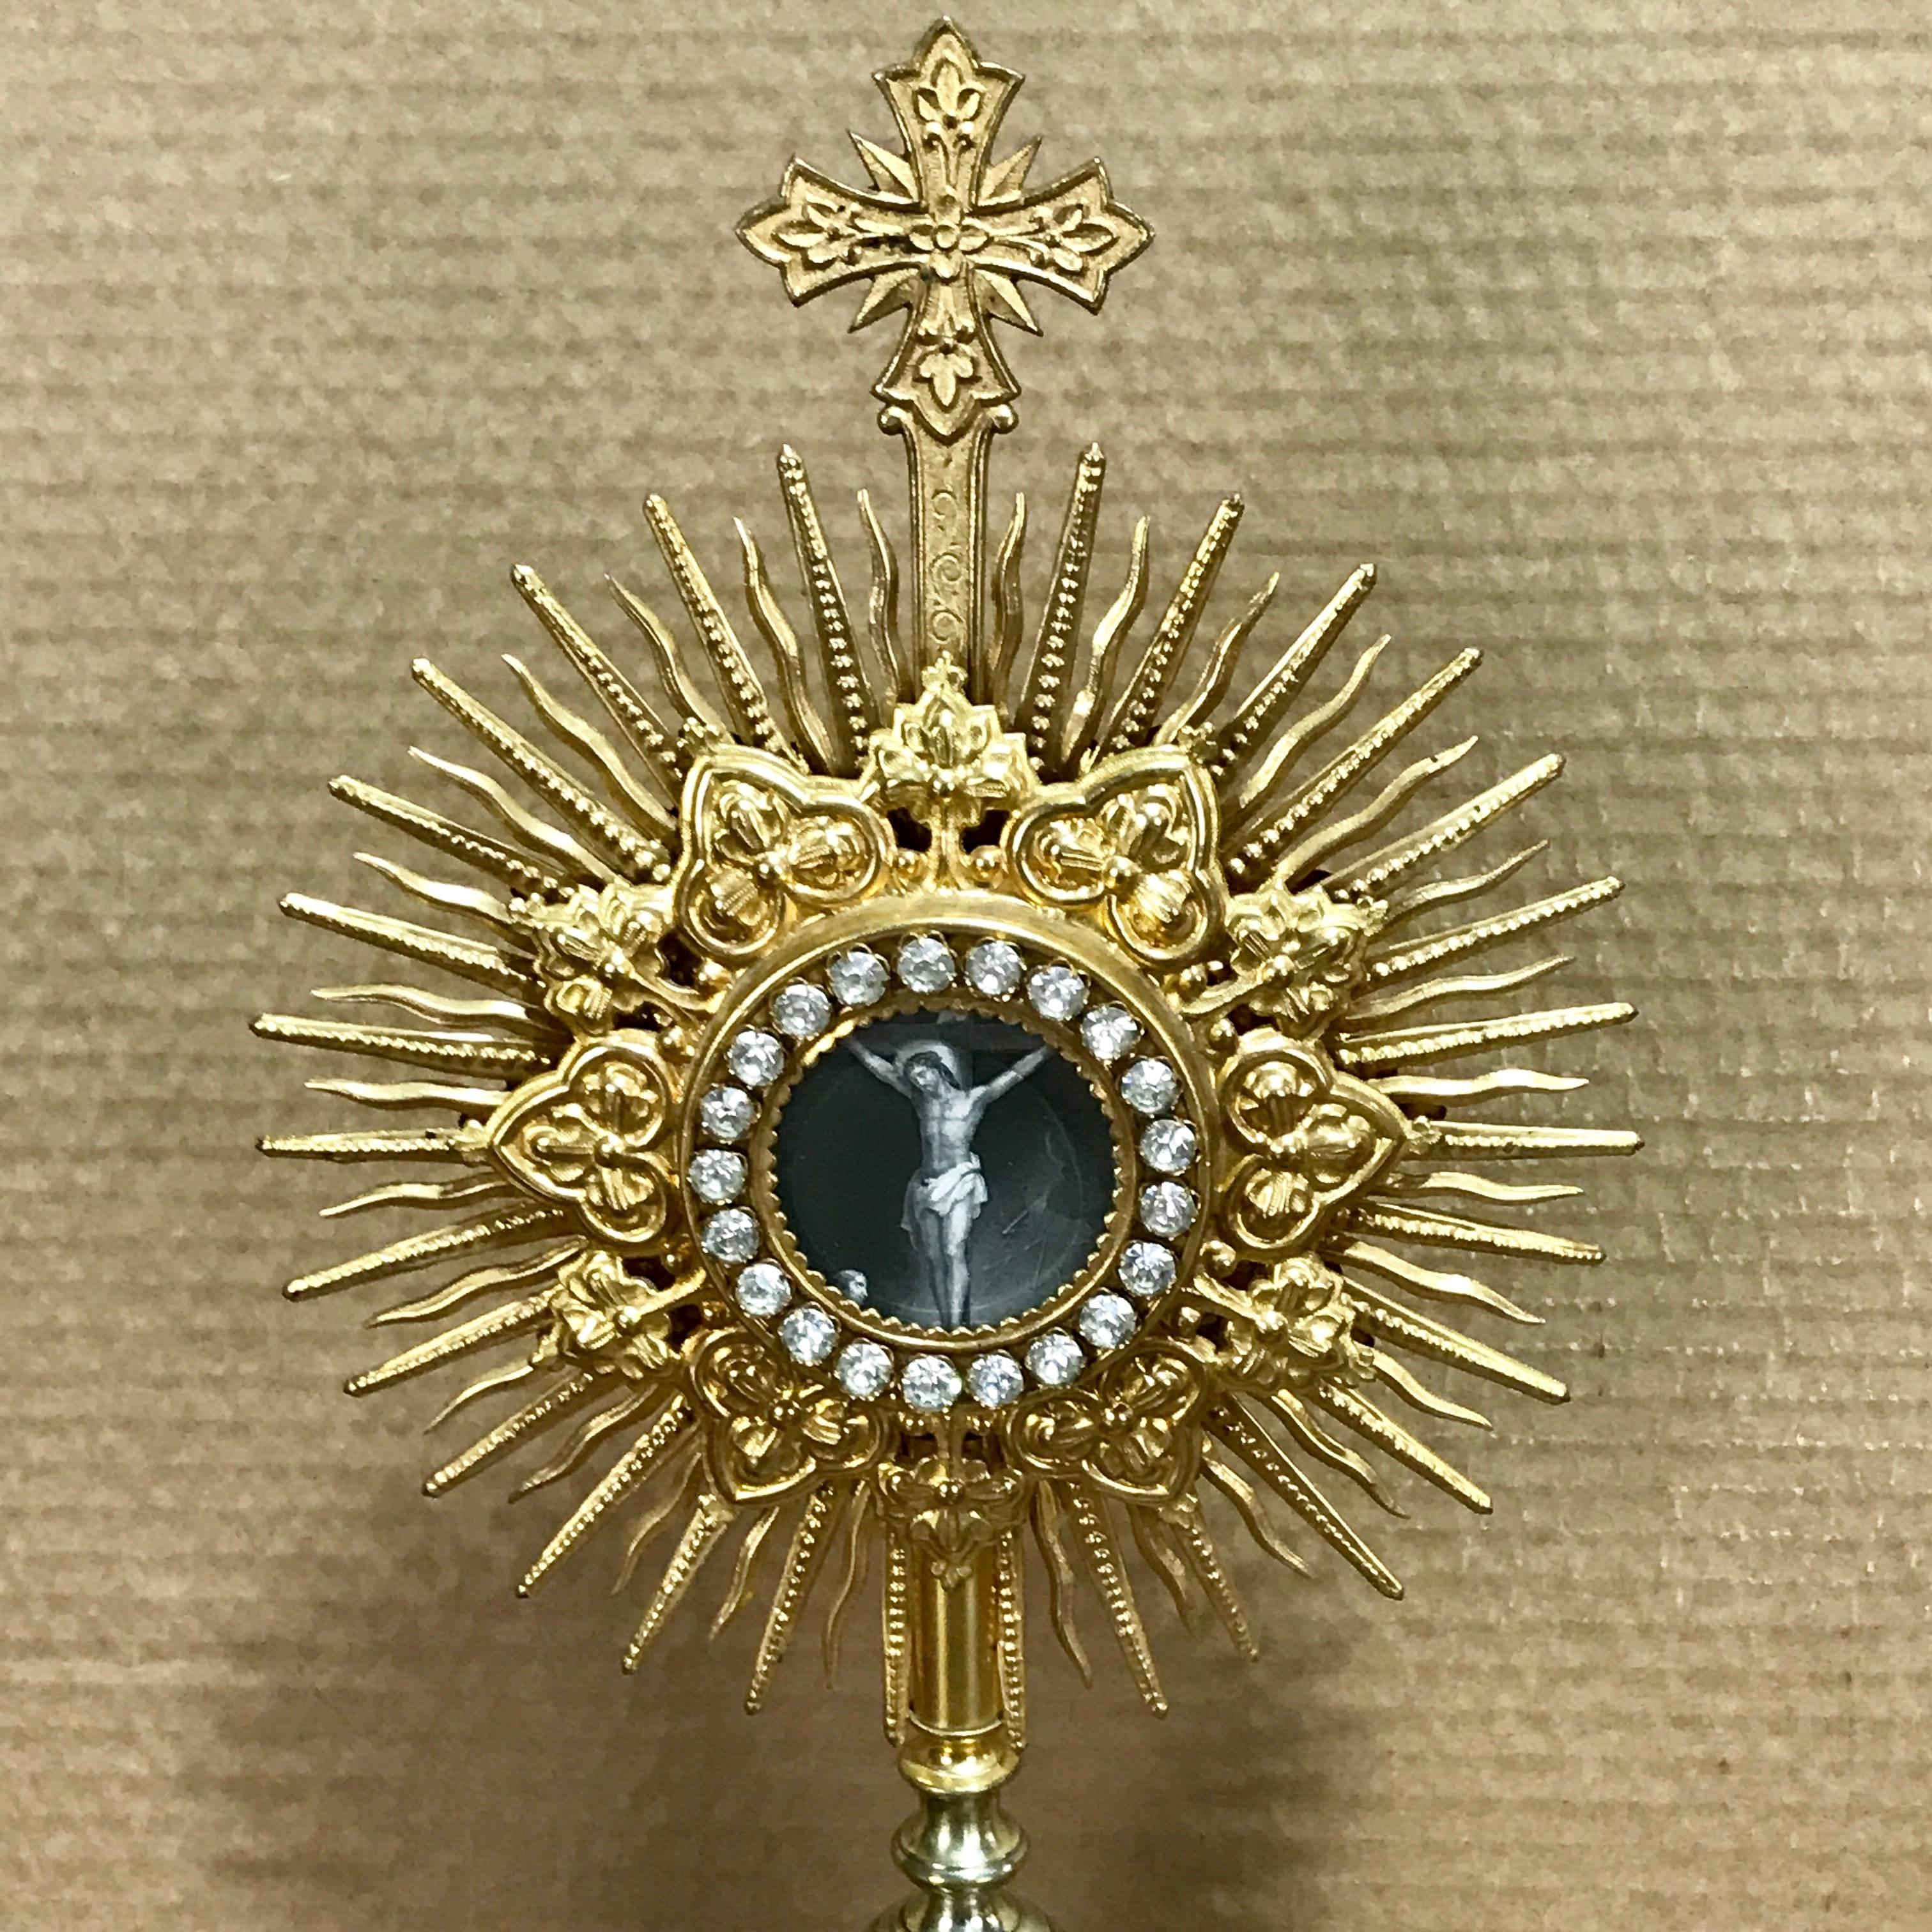 Stunning Antique French gilt bronze and paste monstrance or ostensorium, with elaborate gilt bronze tiered sunburst with continuous surround of large paste stones with engraving of Christ Crucified. The back of the feretory, with 